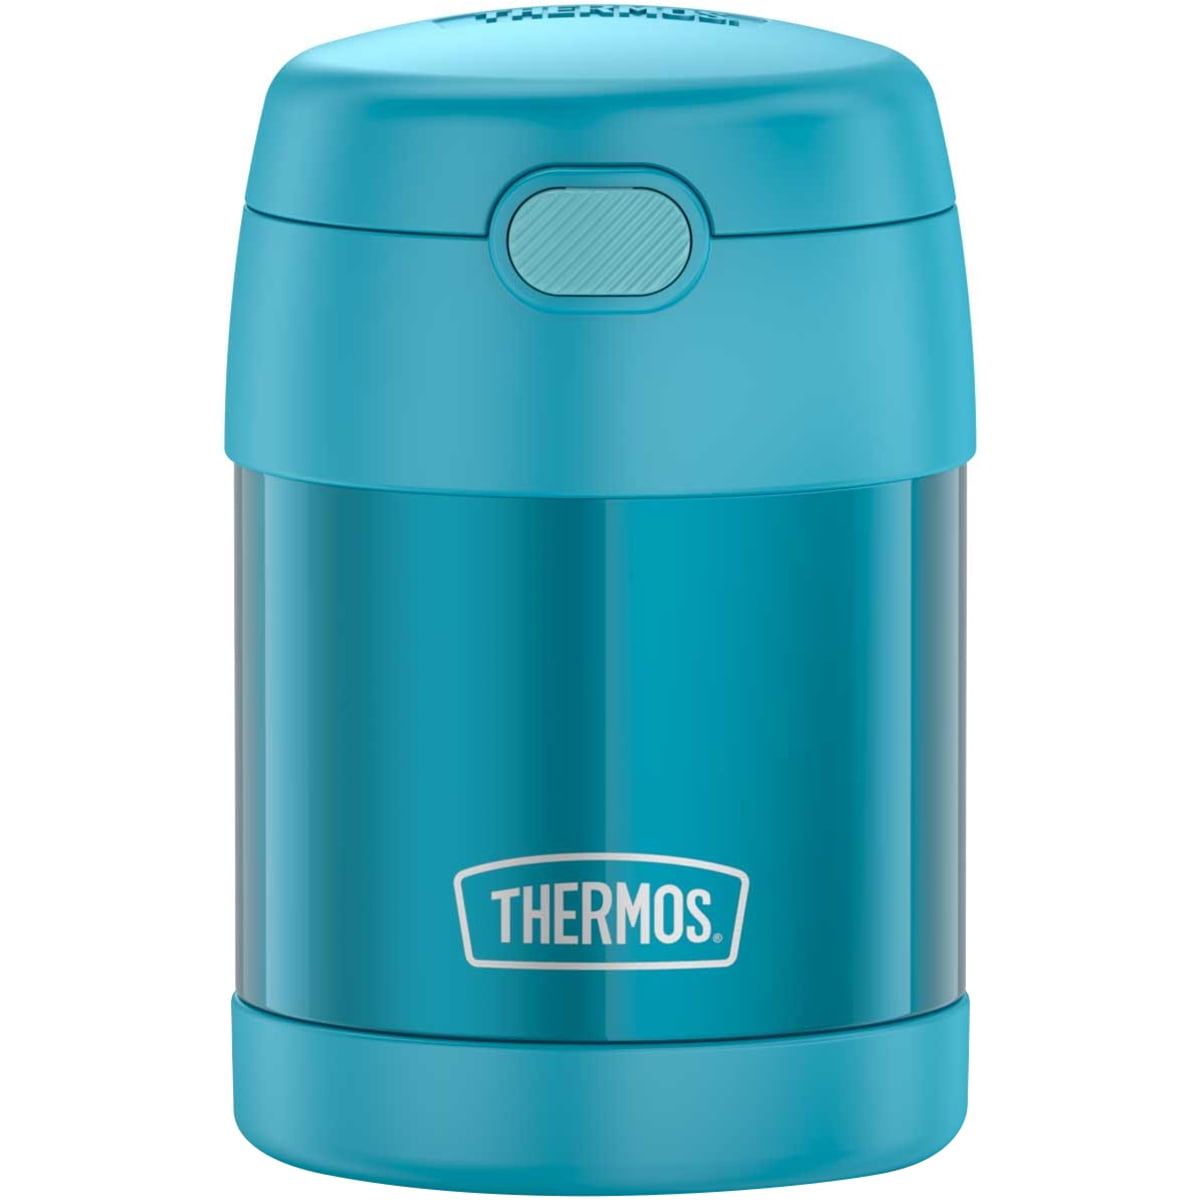 THERMOS FUNTAINER 10 Ounce Stainless Steel Kids Food Jar, Toy Story 4